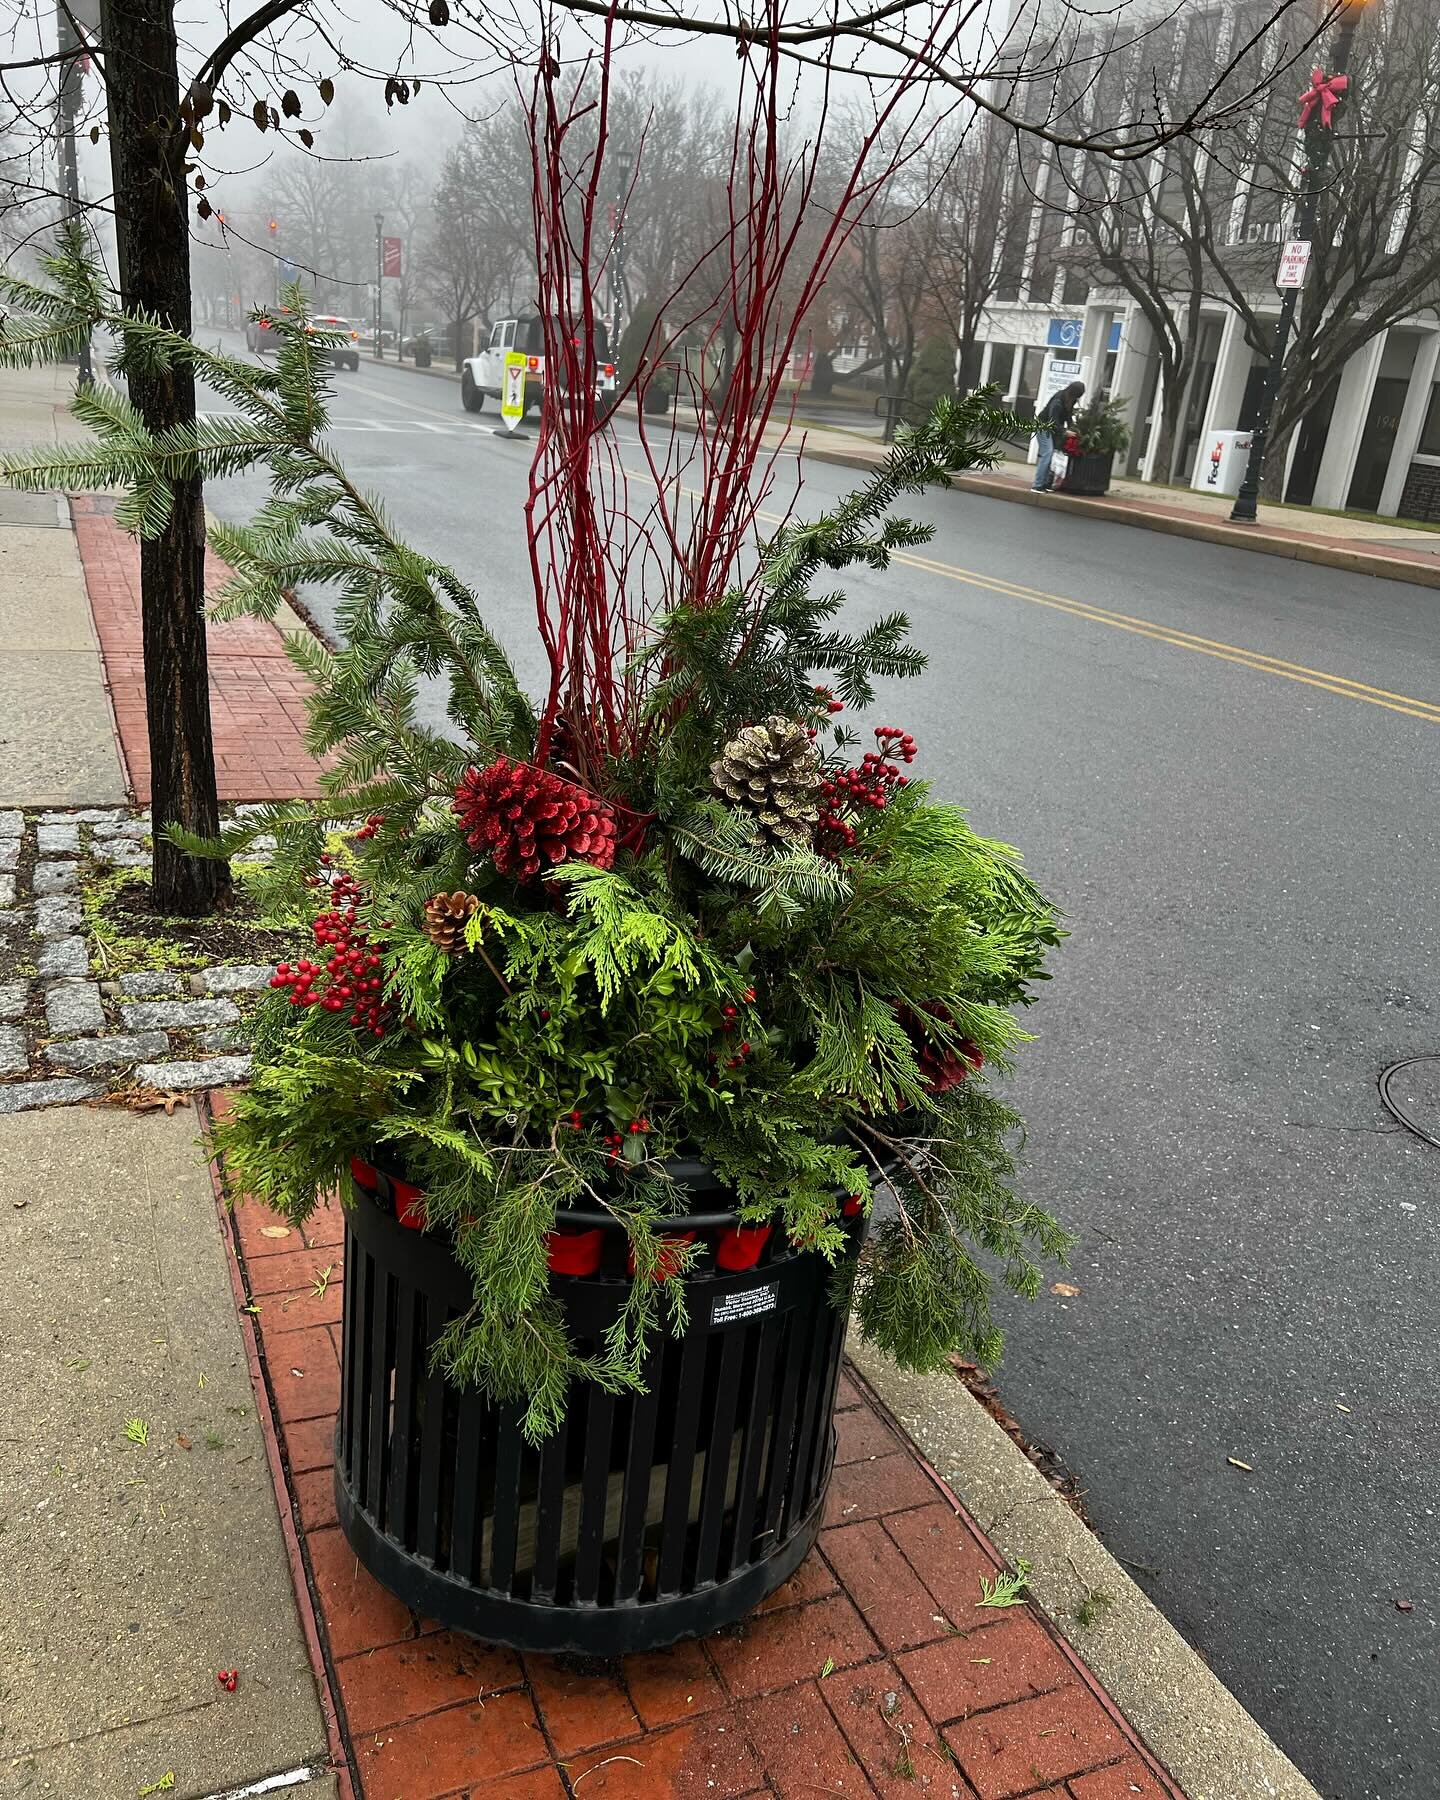 Today our holiday decorating took us to the streets of Yorktown and Shrub Oak. We assembled a total of 35 pots on Commerce and Main Streets. Happy Holidays to all!